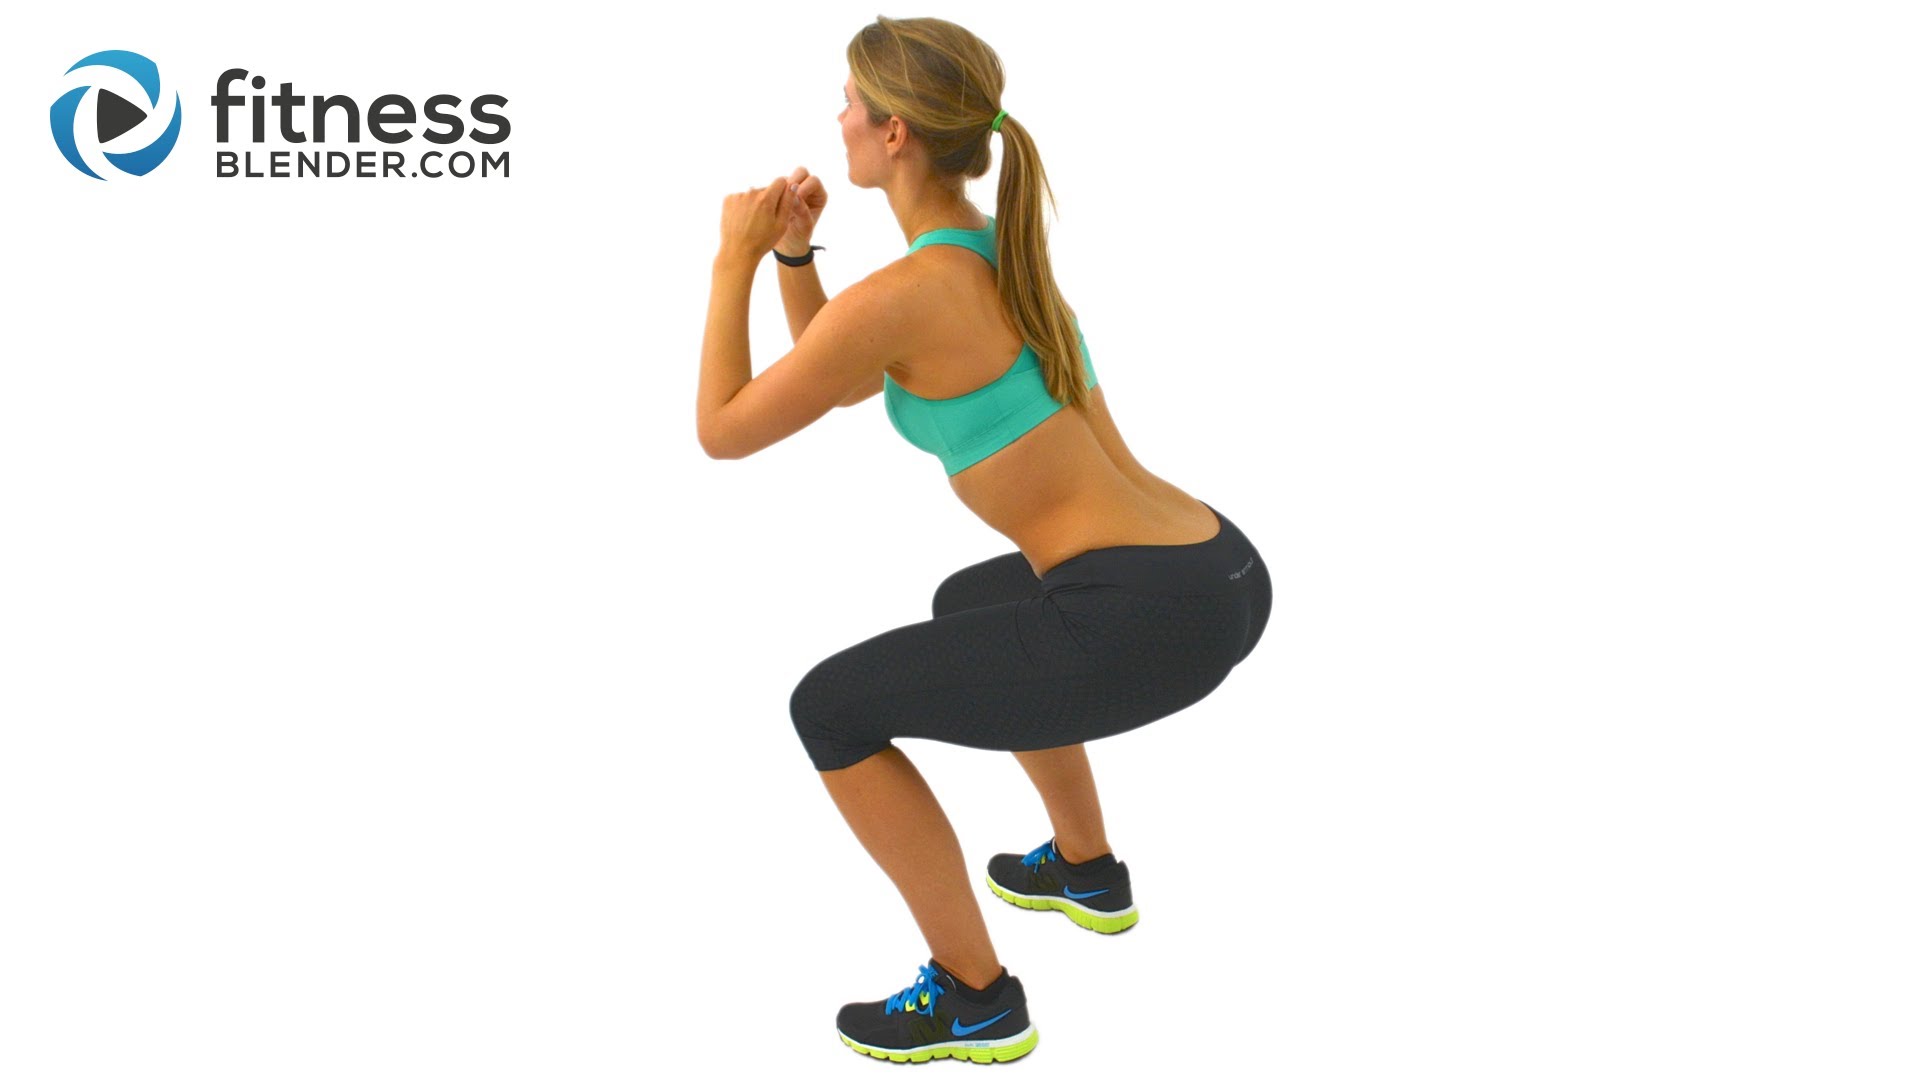 5 Minute Butt And Thigh Workout For A Bigger Butt Exercises To Lift And Tone Your Butt And